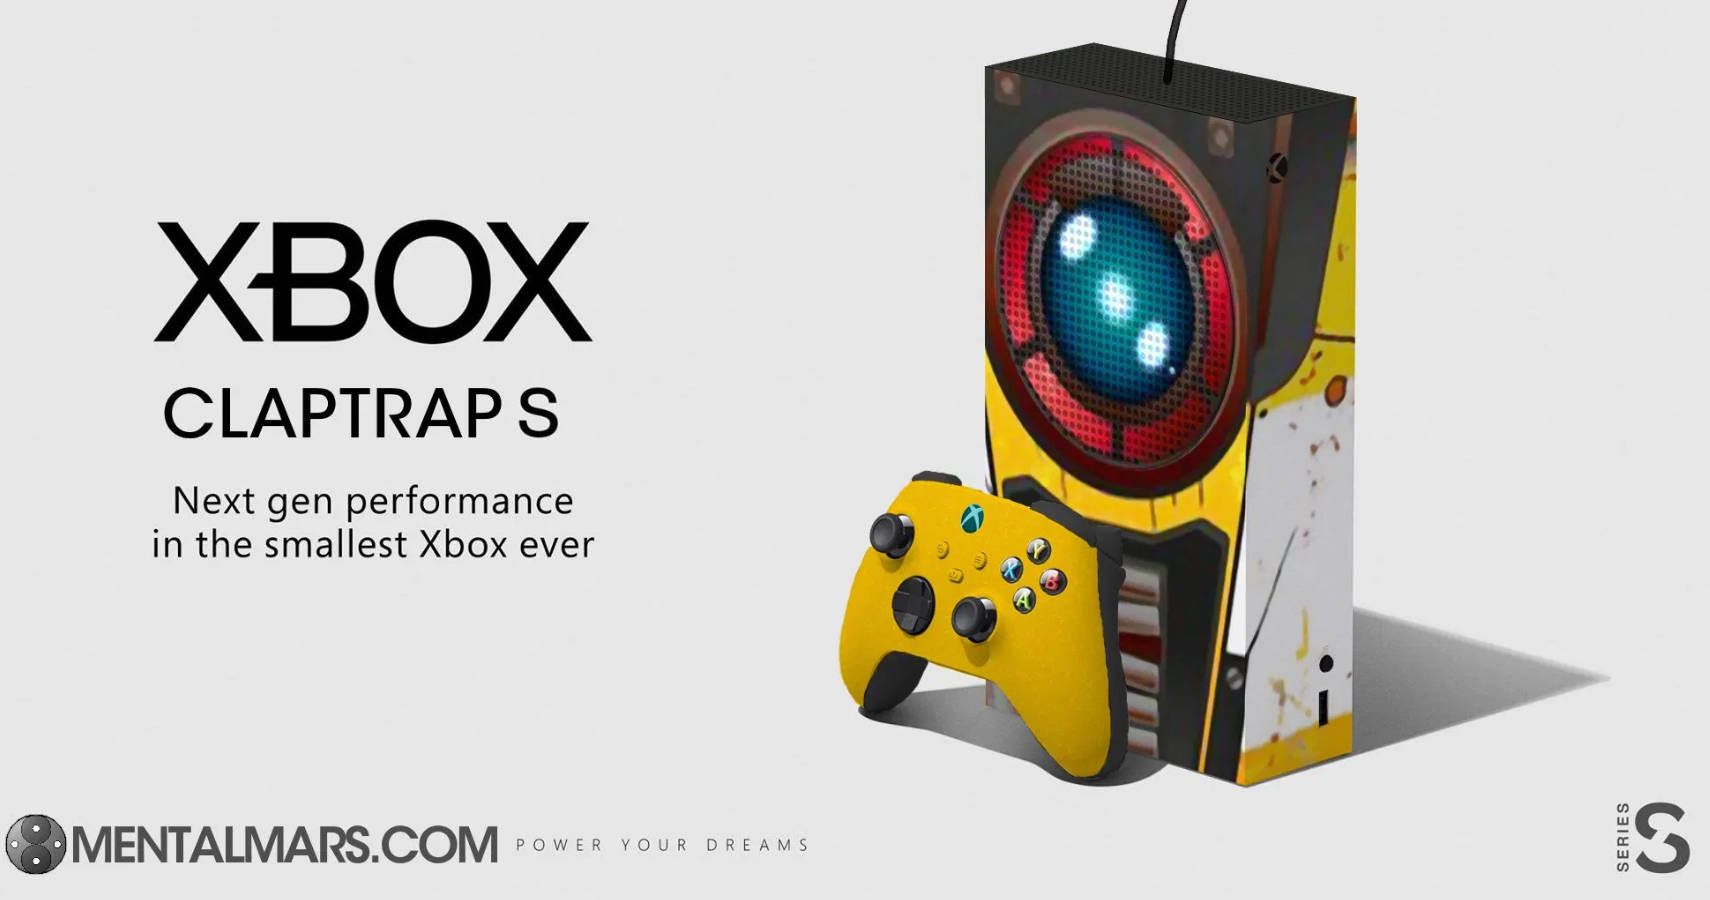 xbox series s edited to look like claptrap from Borderlands.